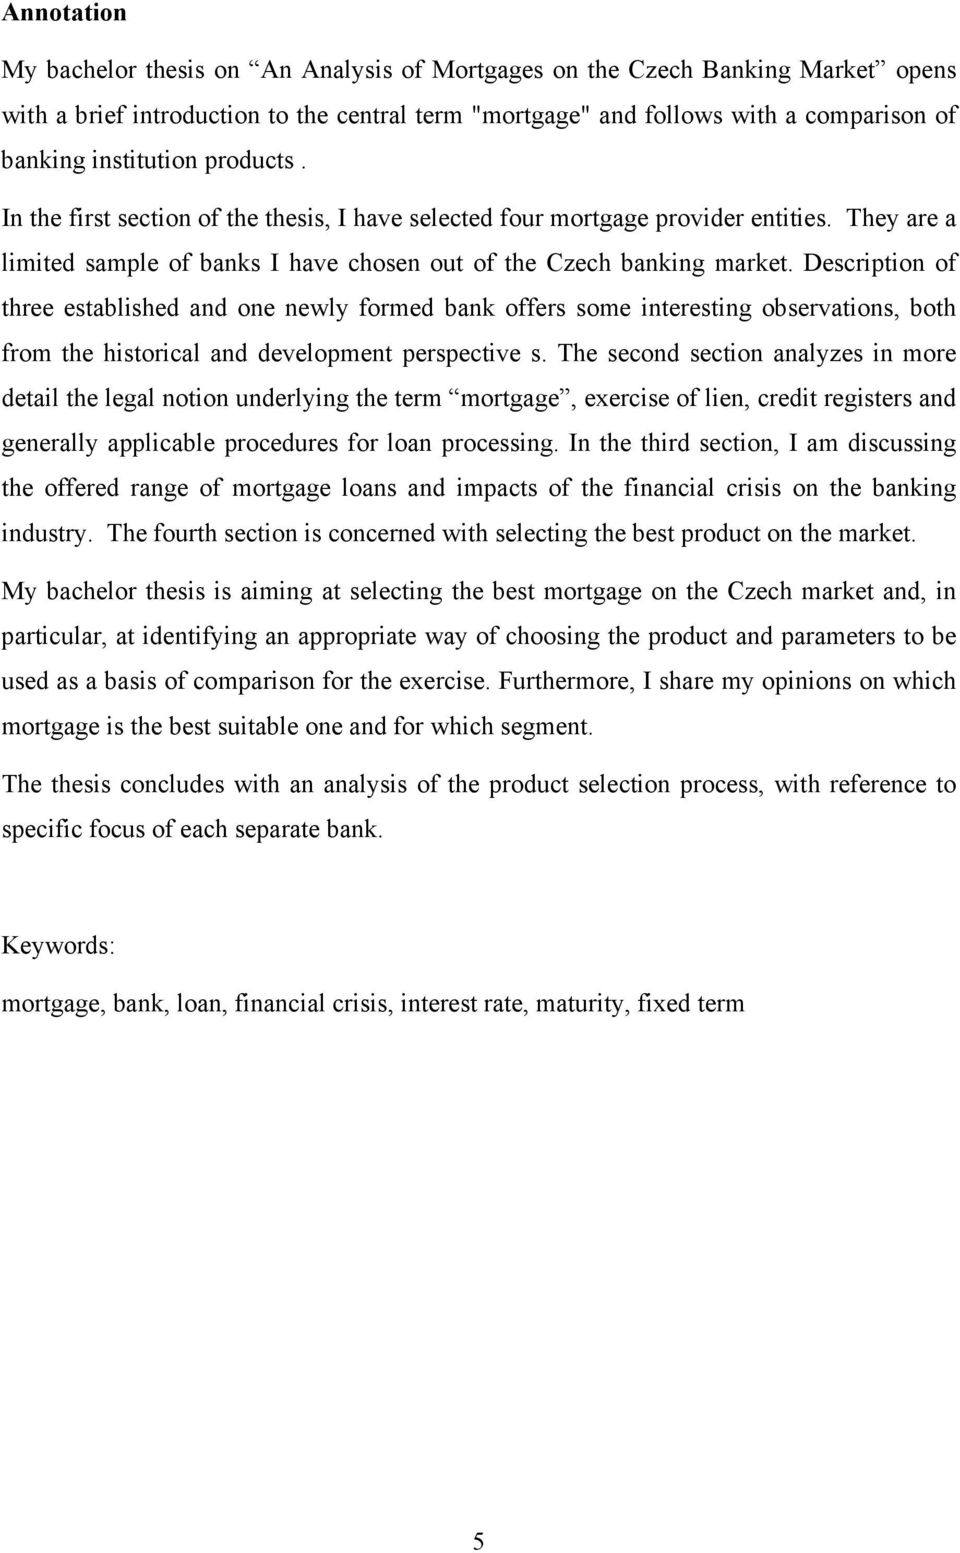 Description of three established and one newly formed bank offers some interesting observations, both from the historical and development perspective s.